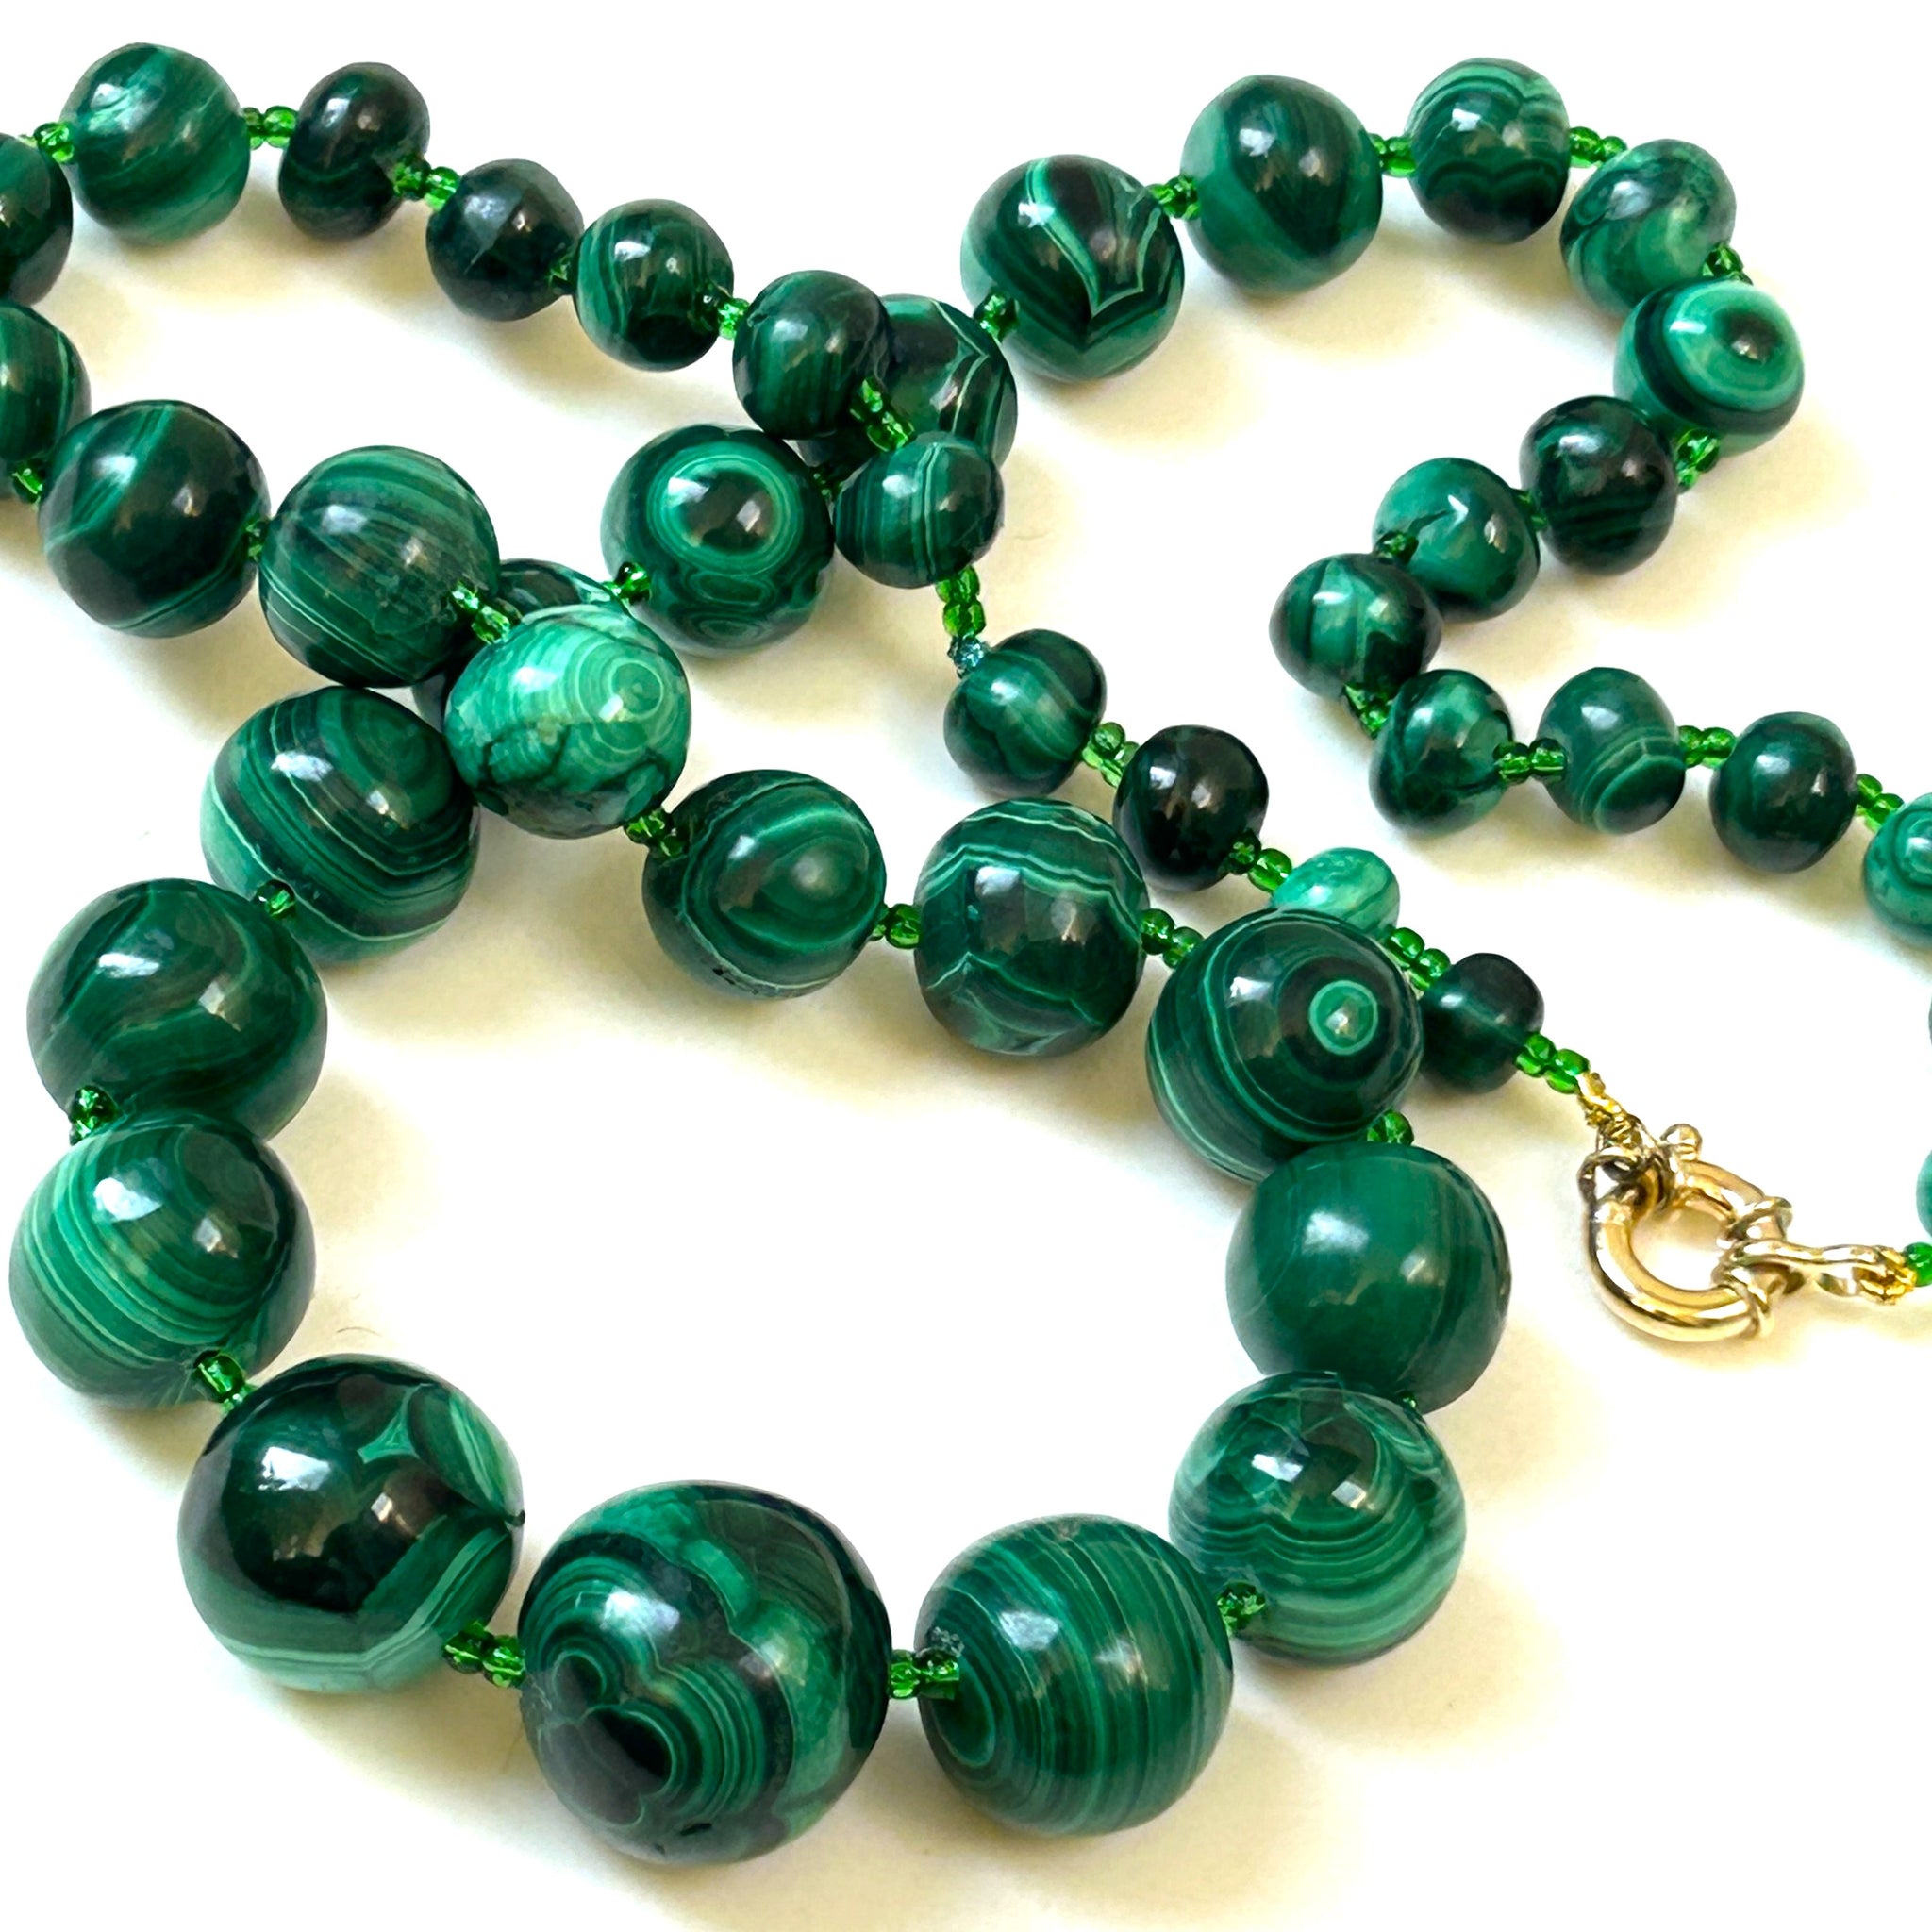 Vintage 9ct Gold and Malachite Bead Necklace